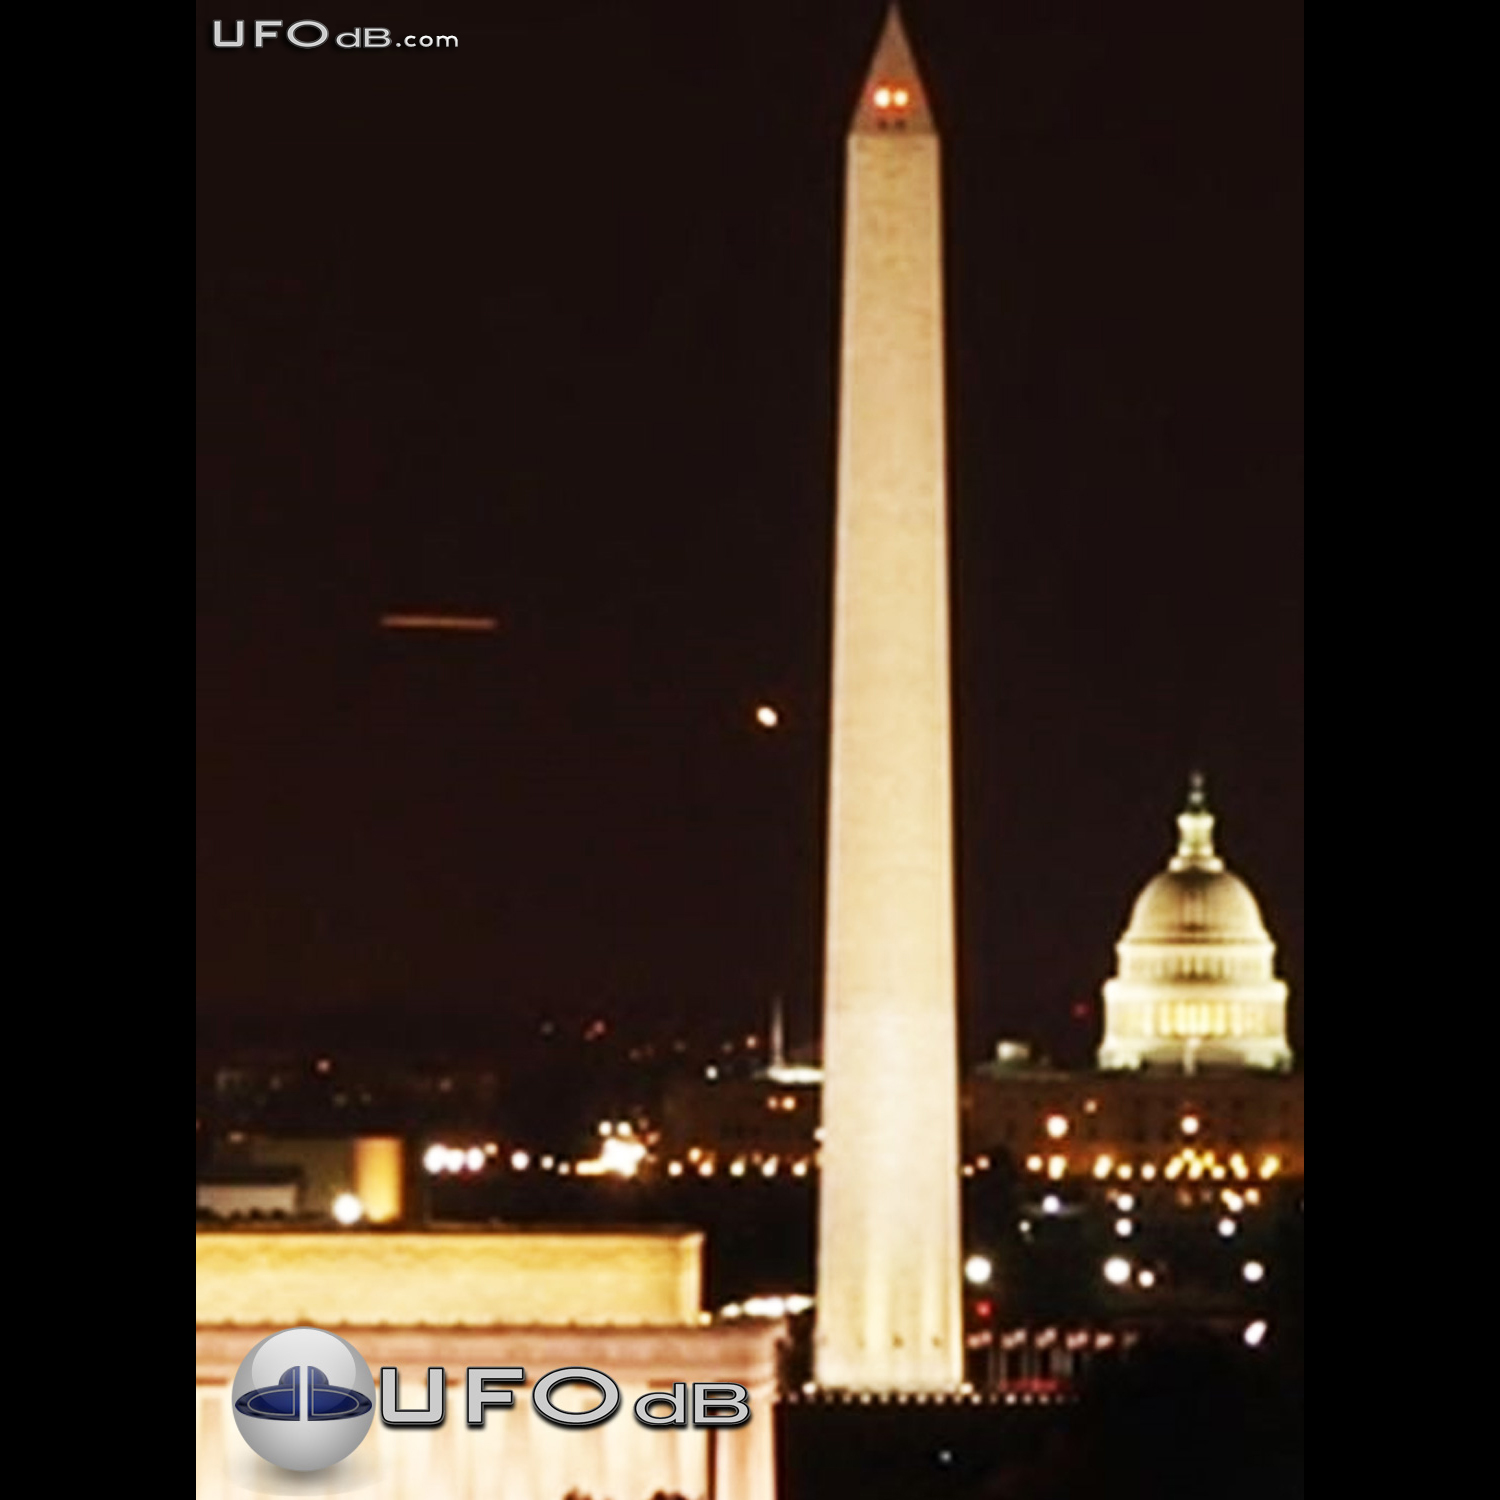 Washington No Fly Zone visited by a UFO | D.C. USA | February 14 2011 UFO Picture #258-1